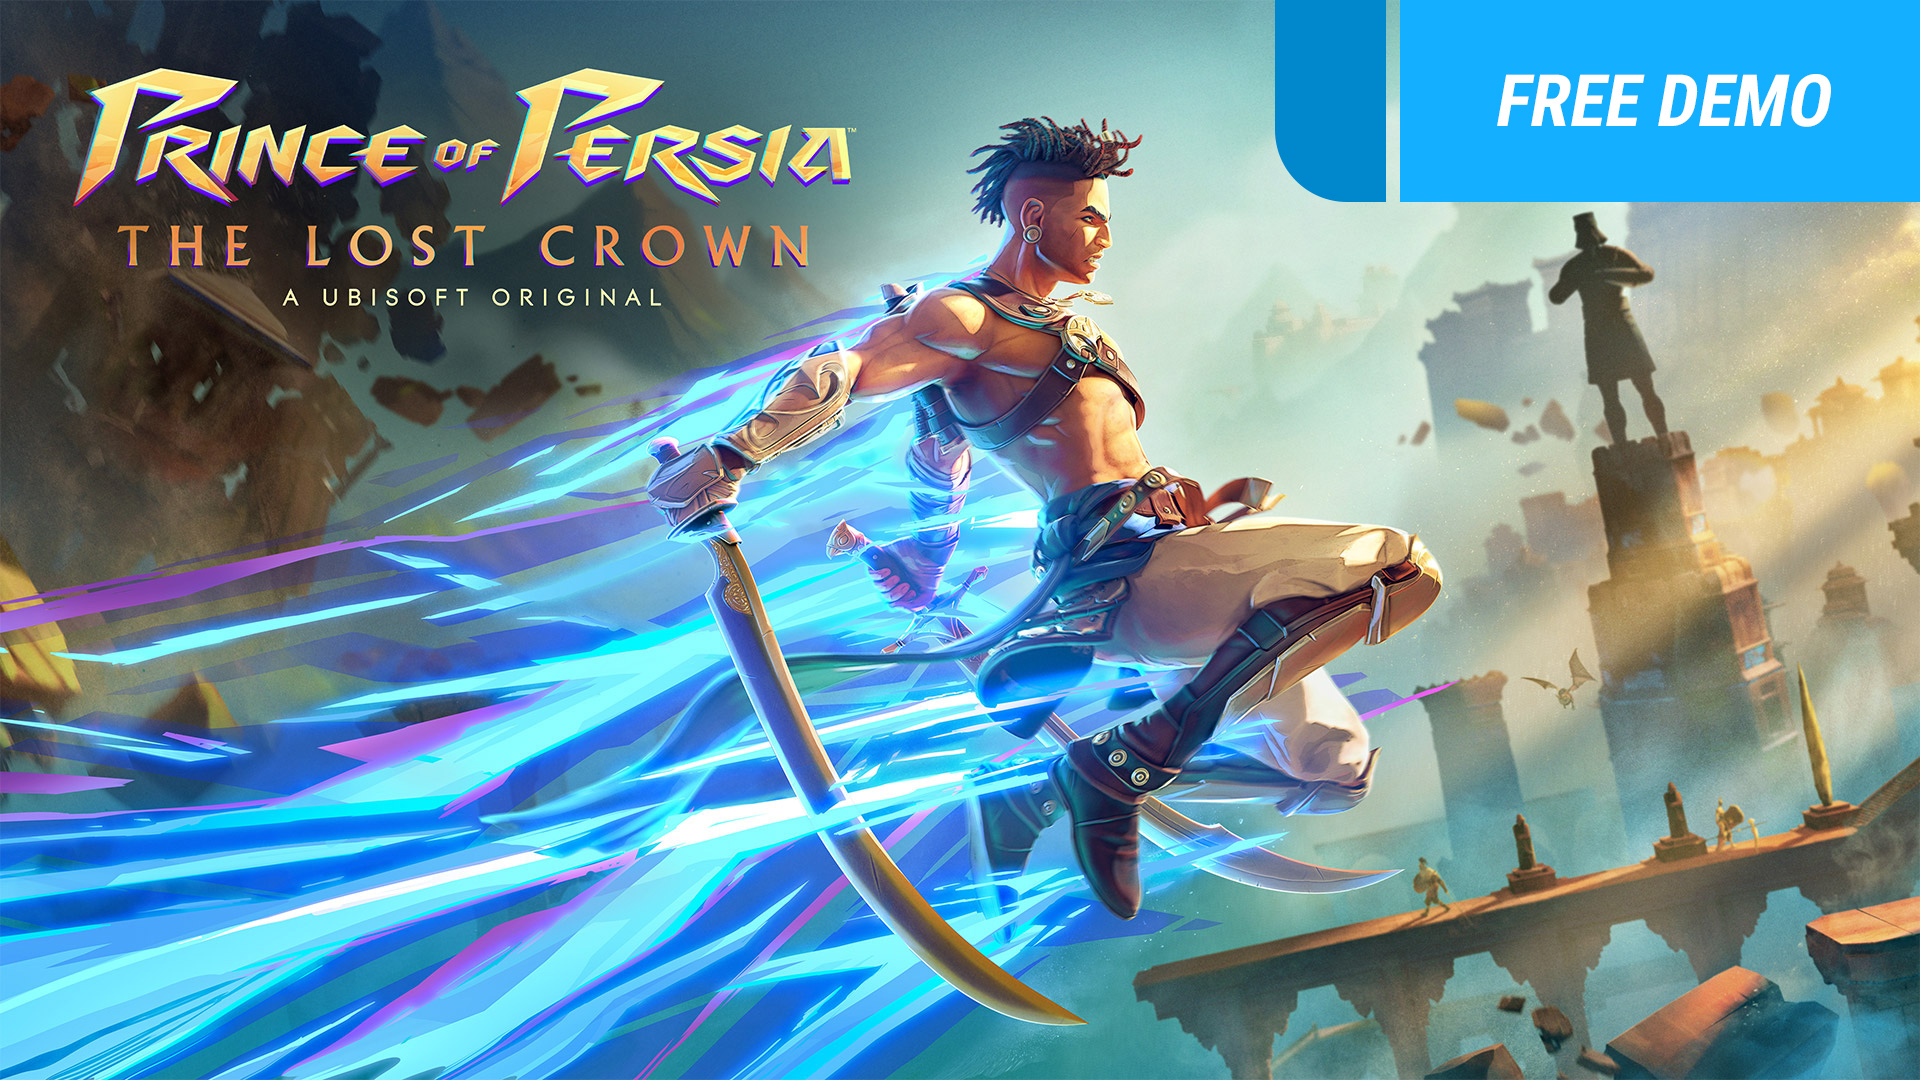 Prince of Persia: The Lost Crown confirmed for Nintendo Switch